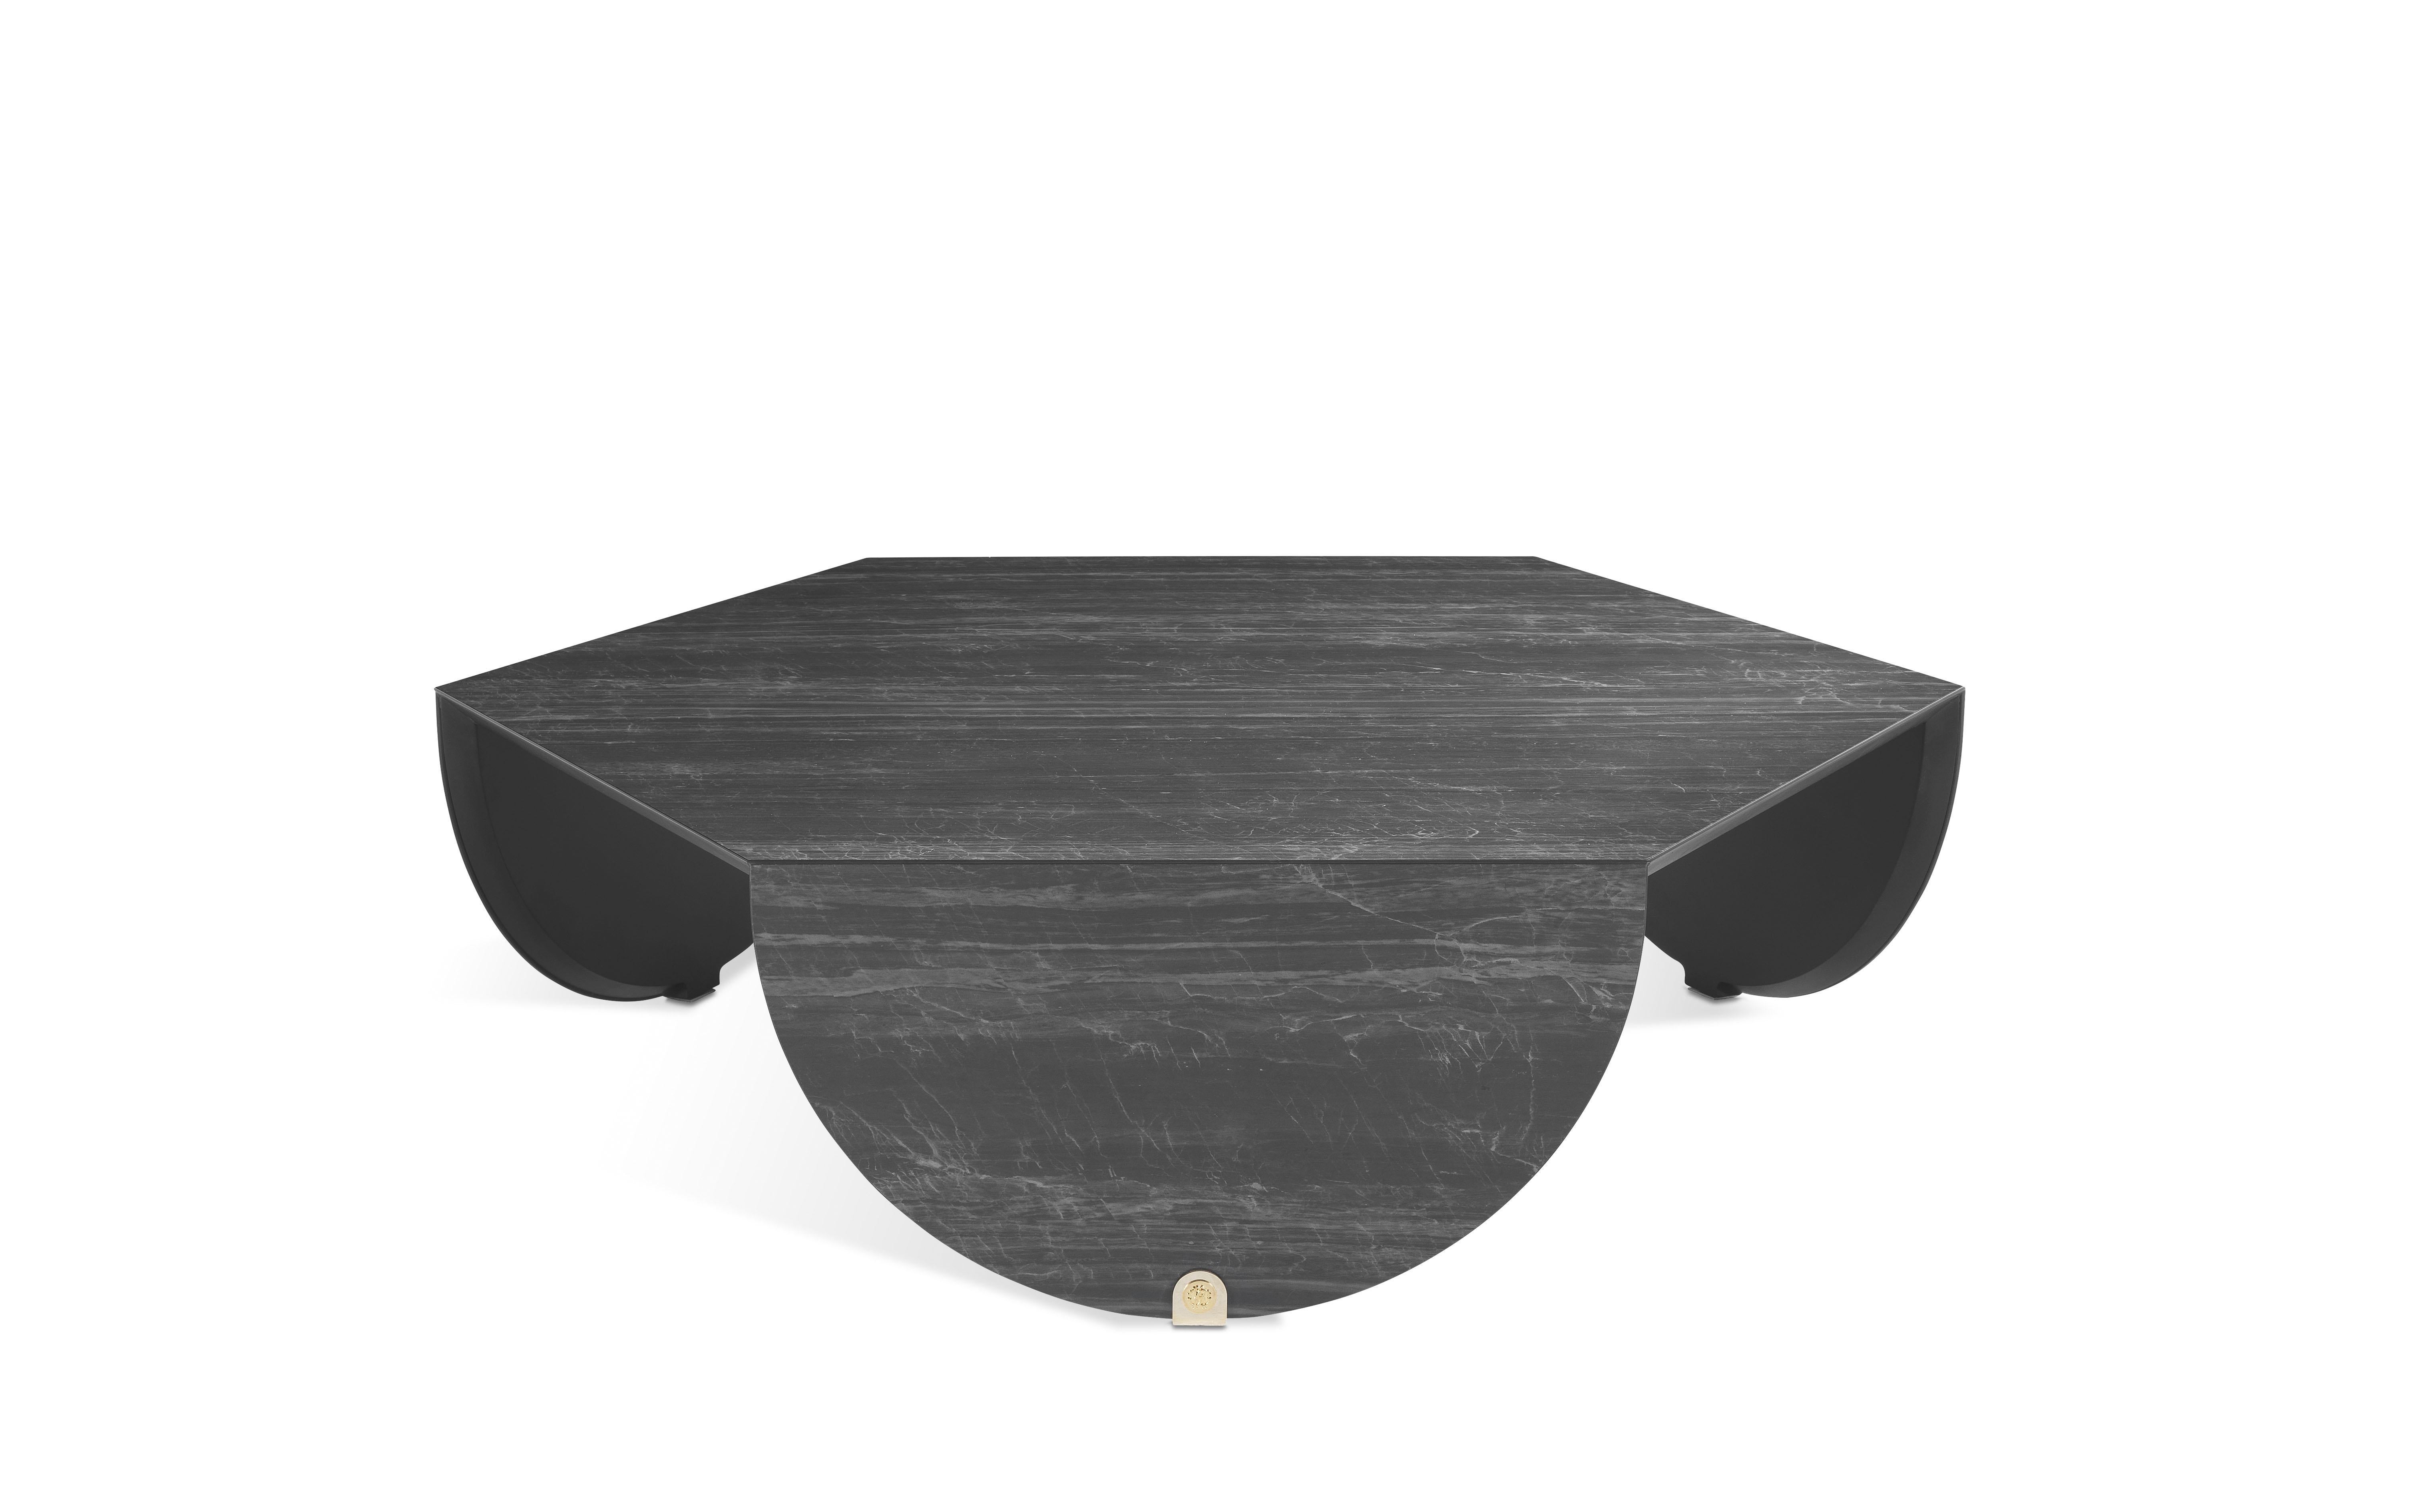 Realized thanks to a complex process of the craftsmanship of the porcelain stoneware, the Inagua table stands out for the hexagonal shape of the top that contrasts with the curved lines of the legs lending a special dynamism to the whole. Available